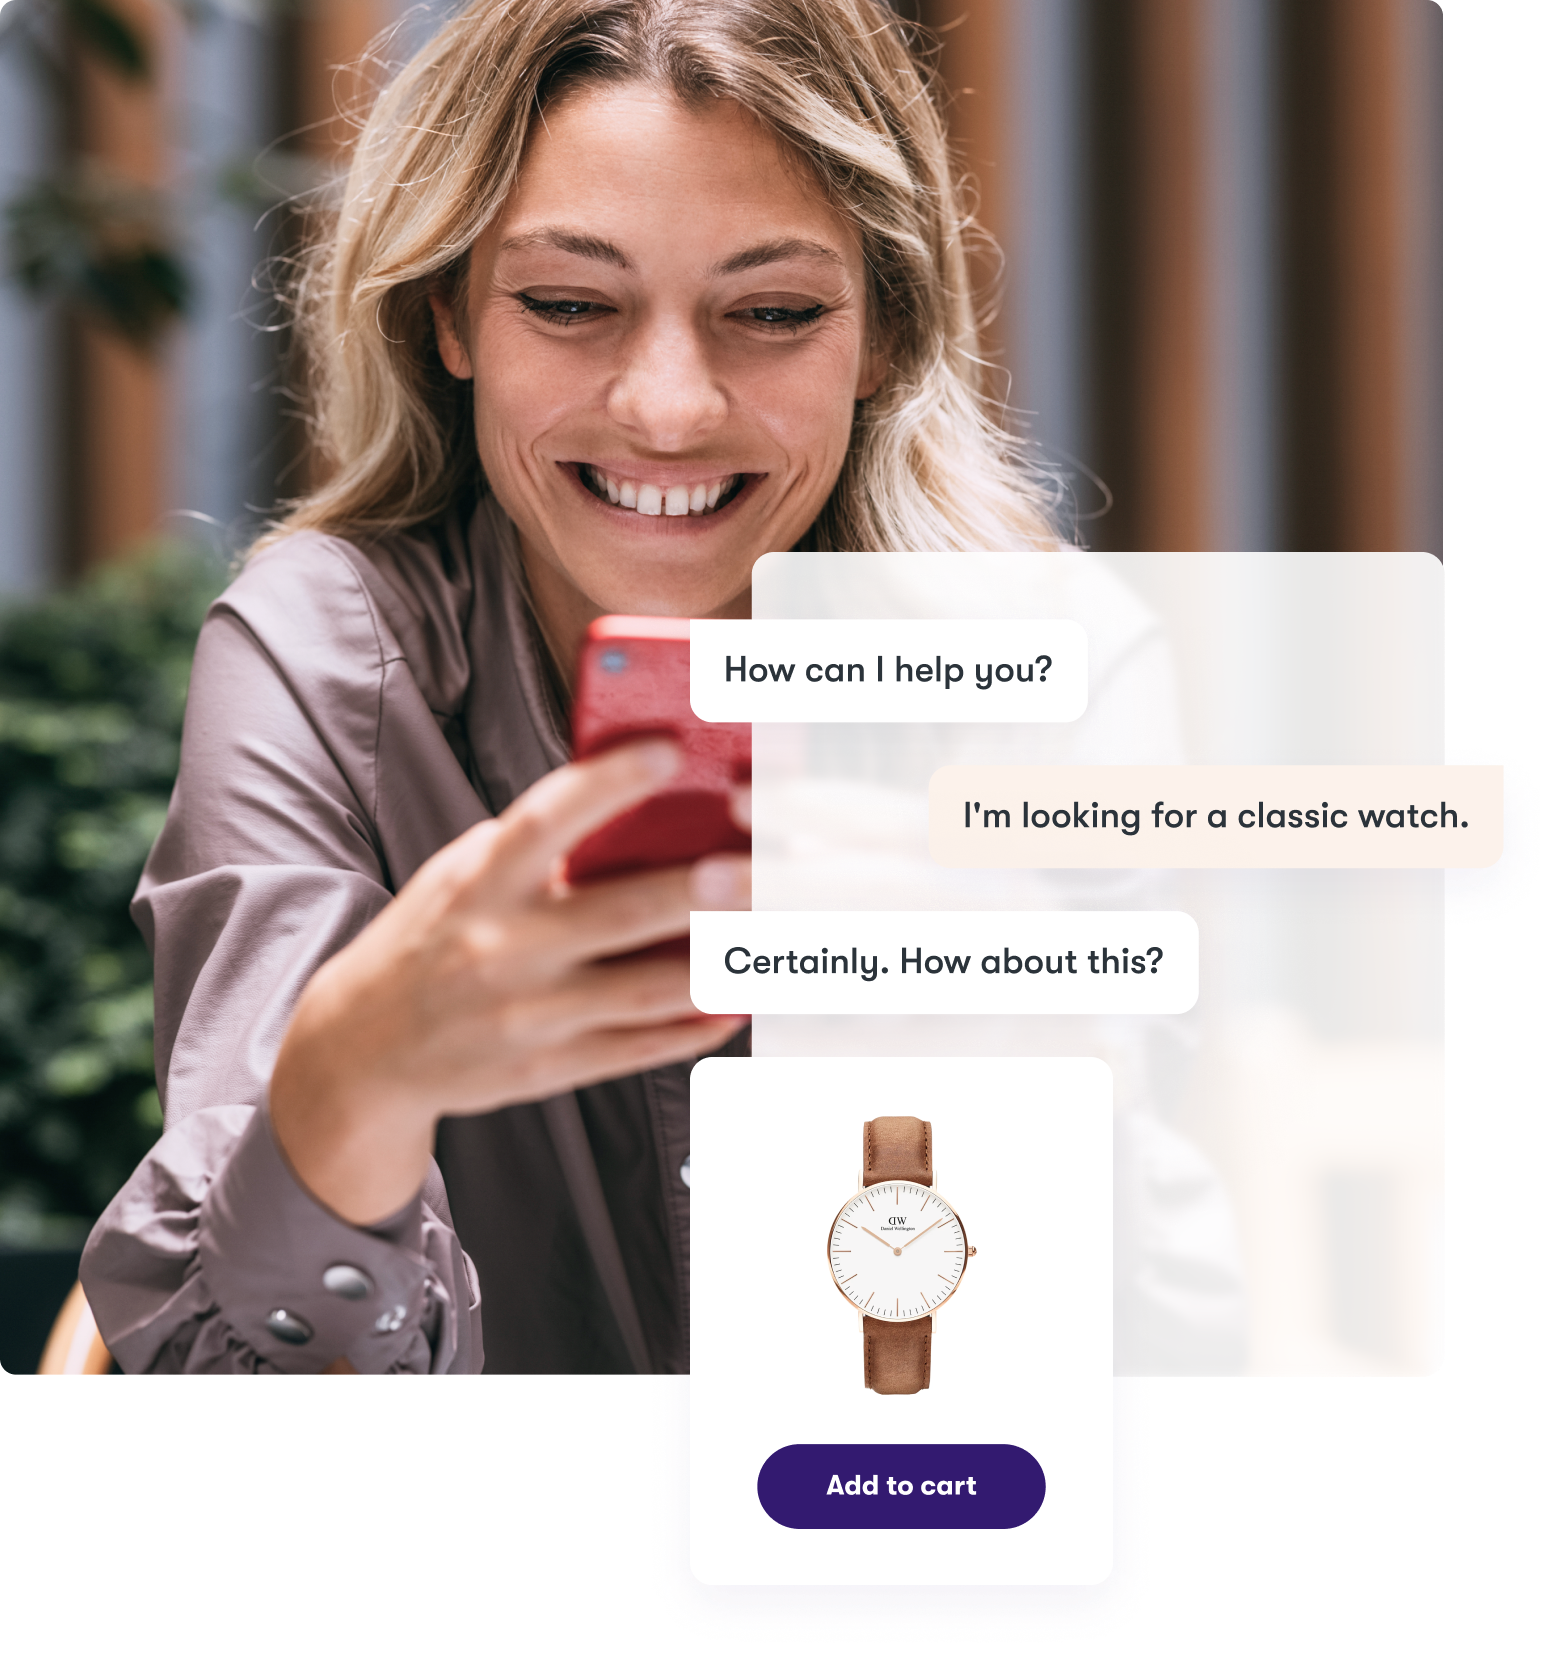 A smiling woman buys a watch with the help of a Certainly AI chatbot.